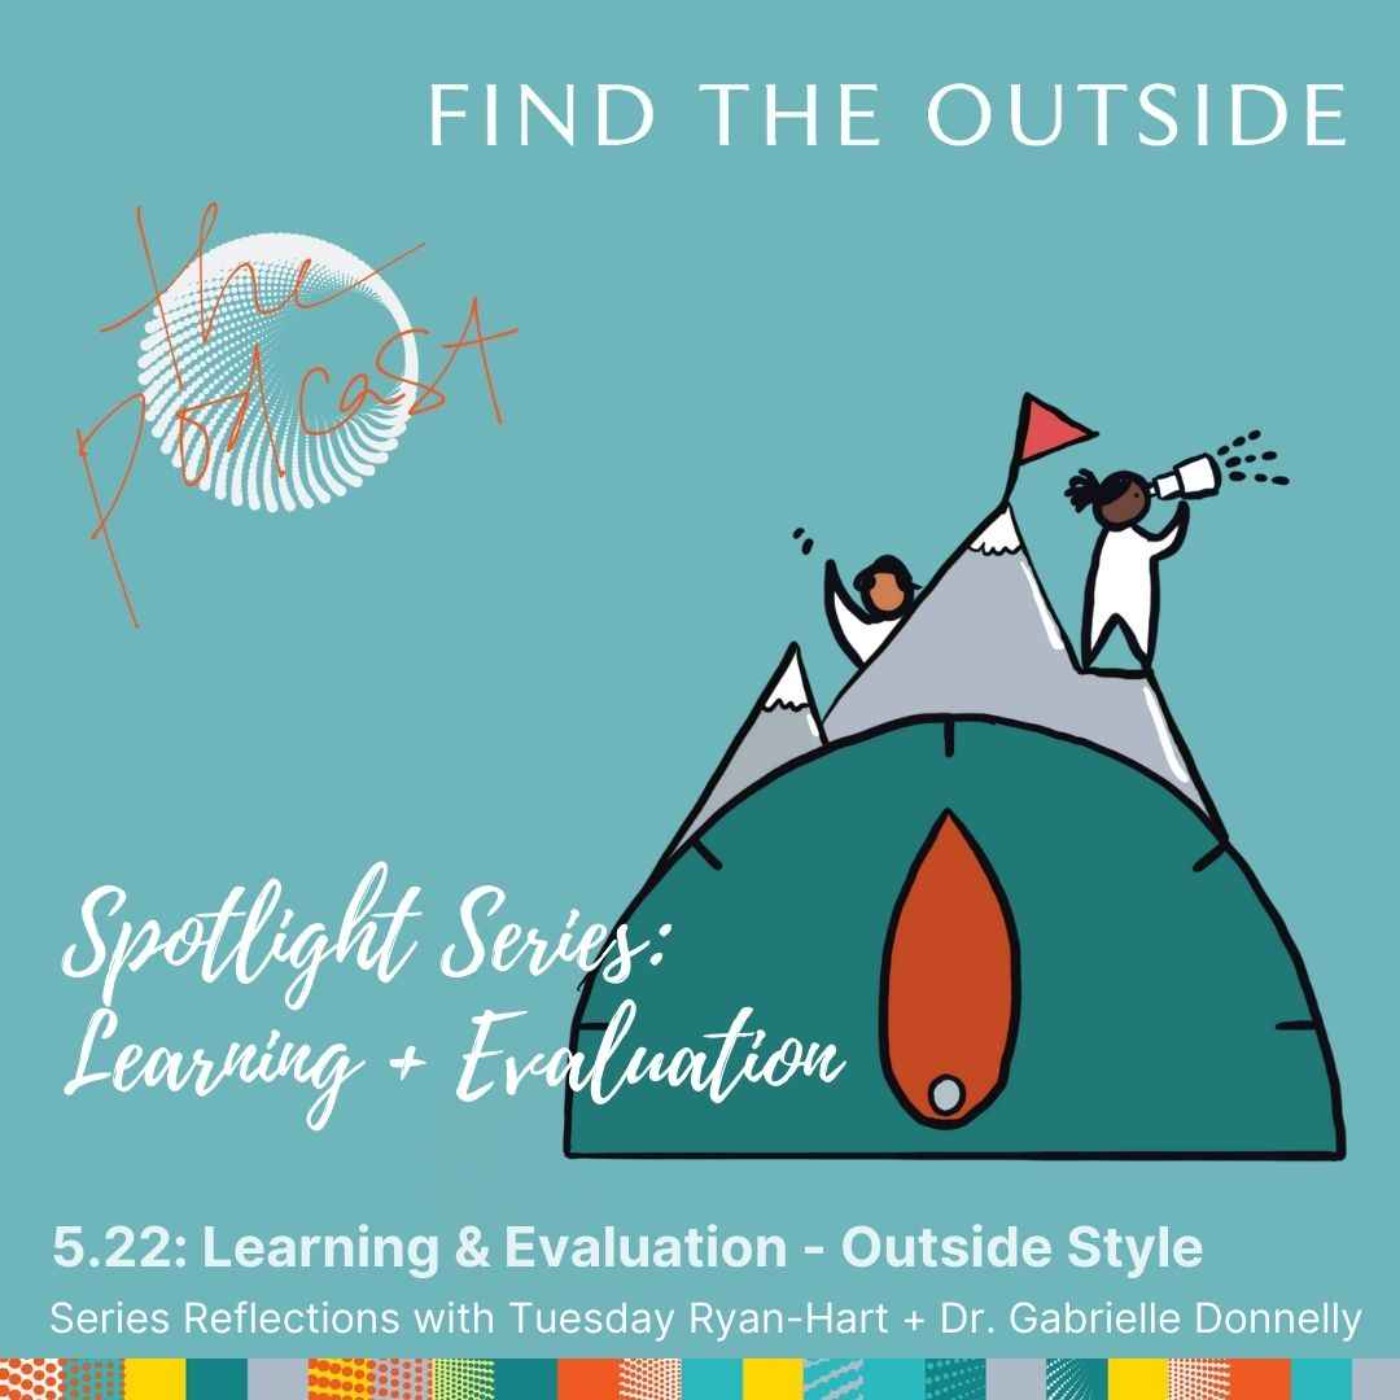 5.22: Learning + Evaluation Spotlight Series: Reflections from Tuesday Ryan-Hart & Dr. Gabrielle Donnelly